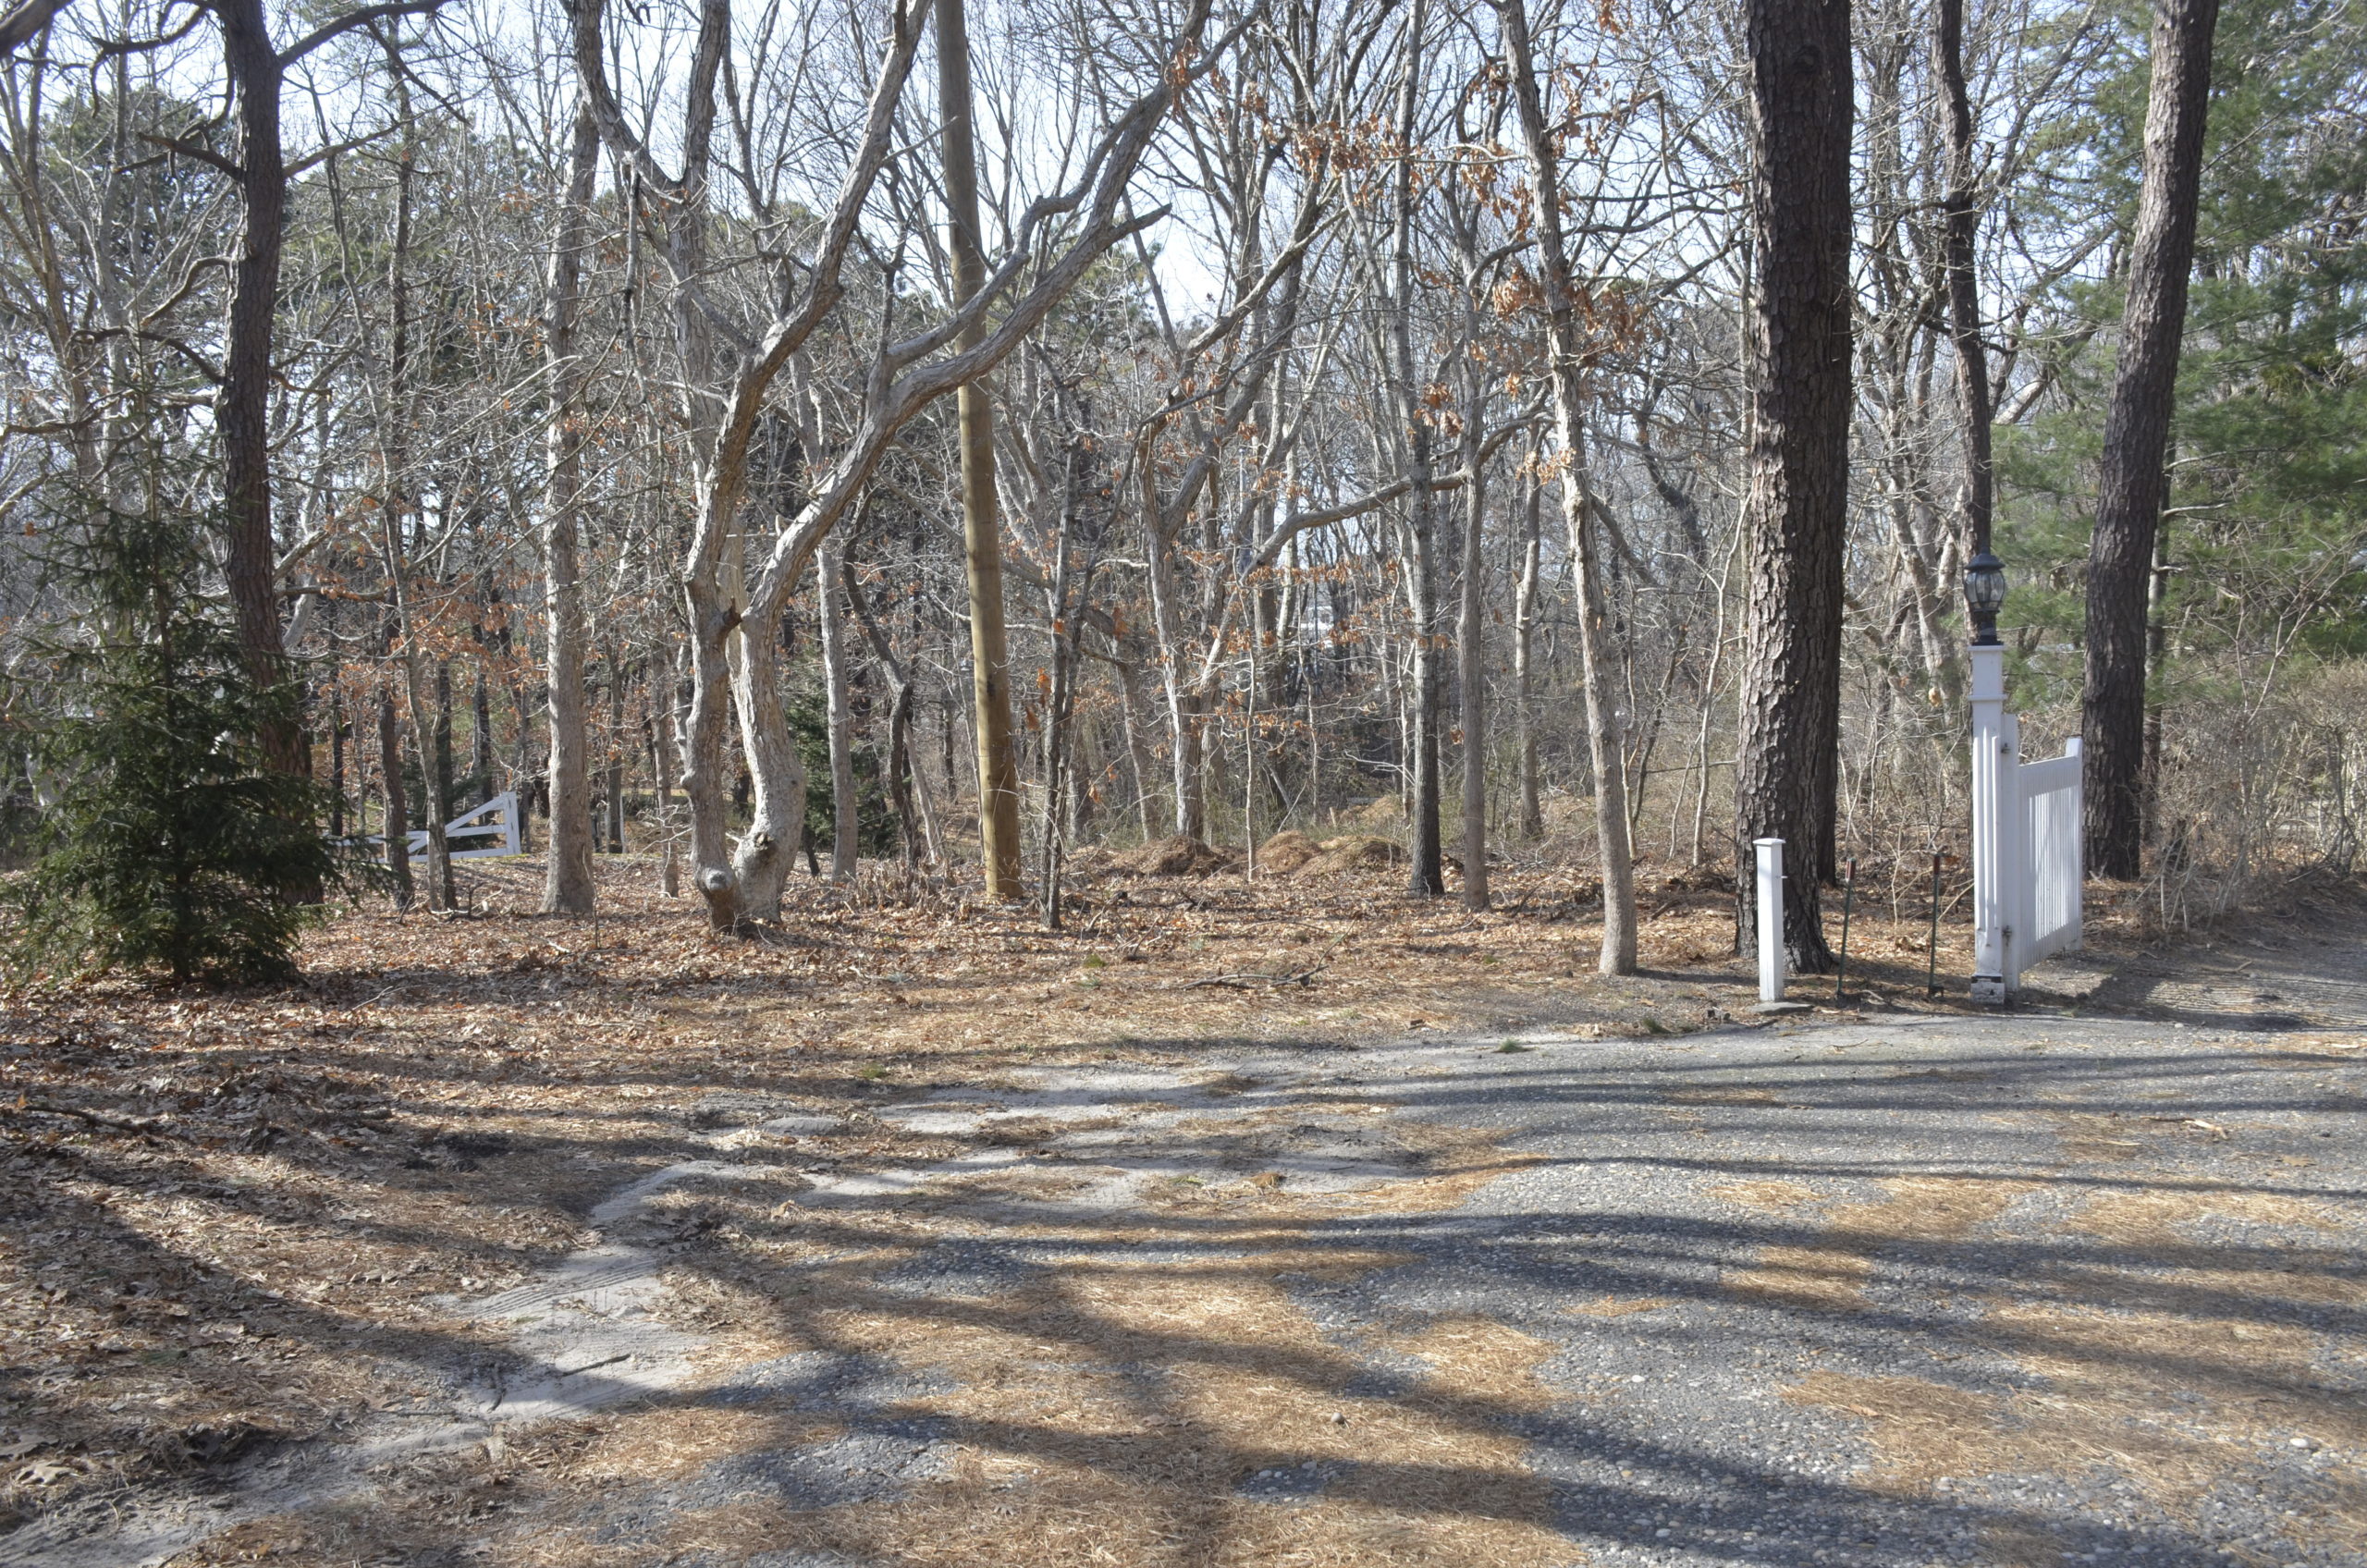 Southampton Town officials plan to extend Hillside Road in Shinnecock Hills, which is currently leads to a dead end, to Hill Station Road. GREG WEHNER